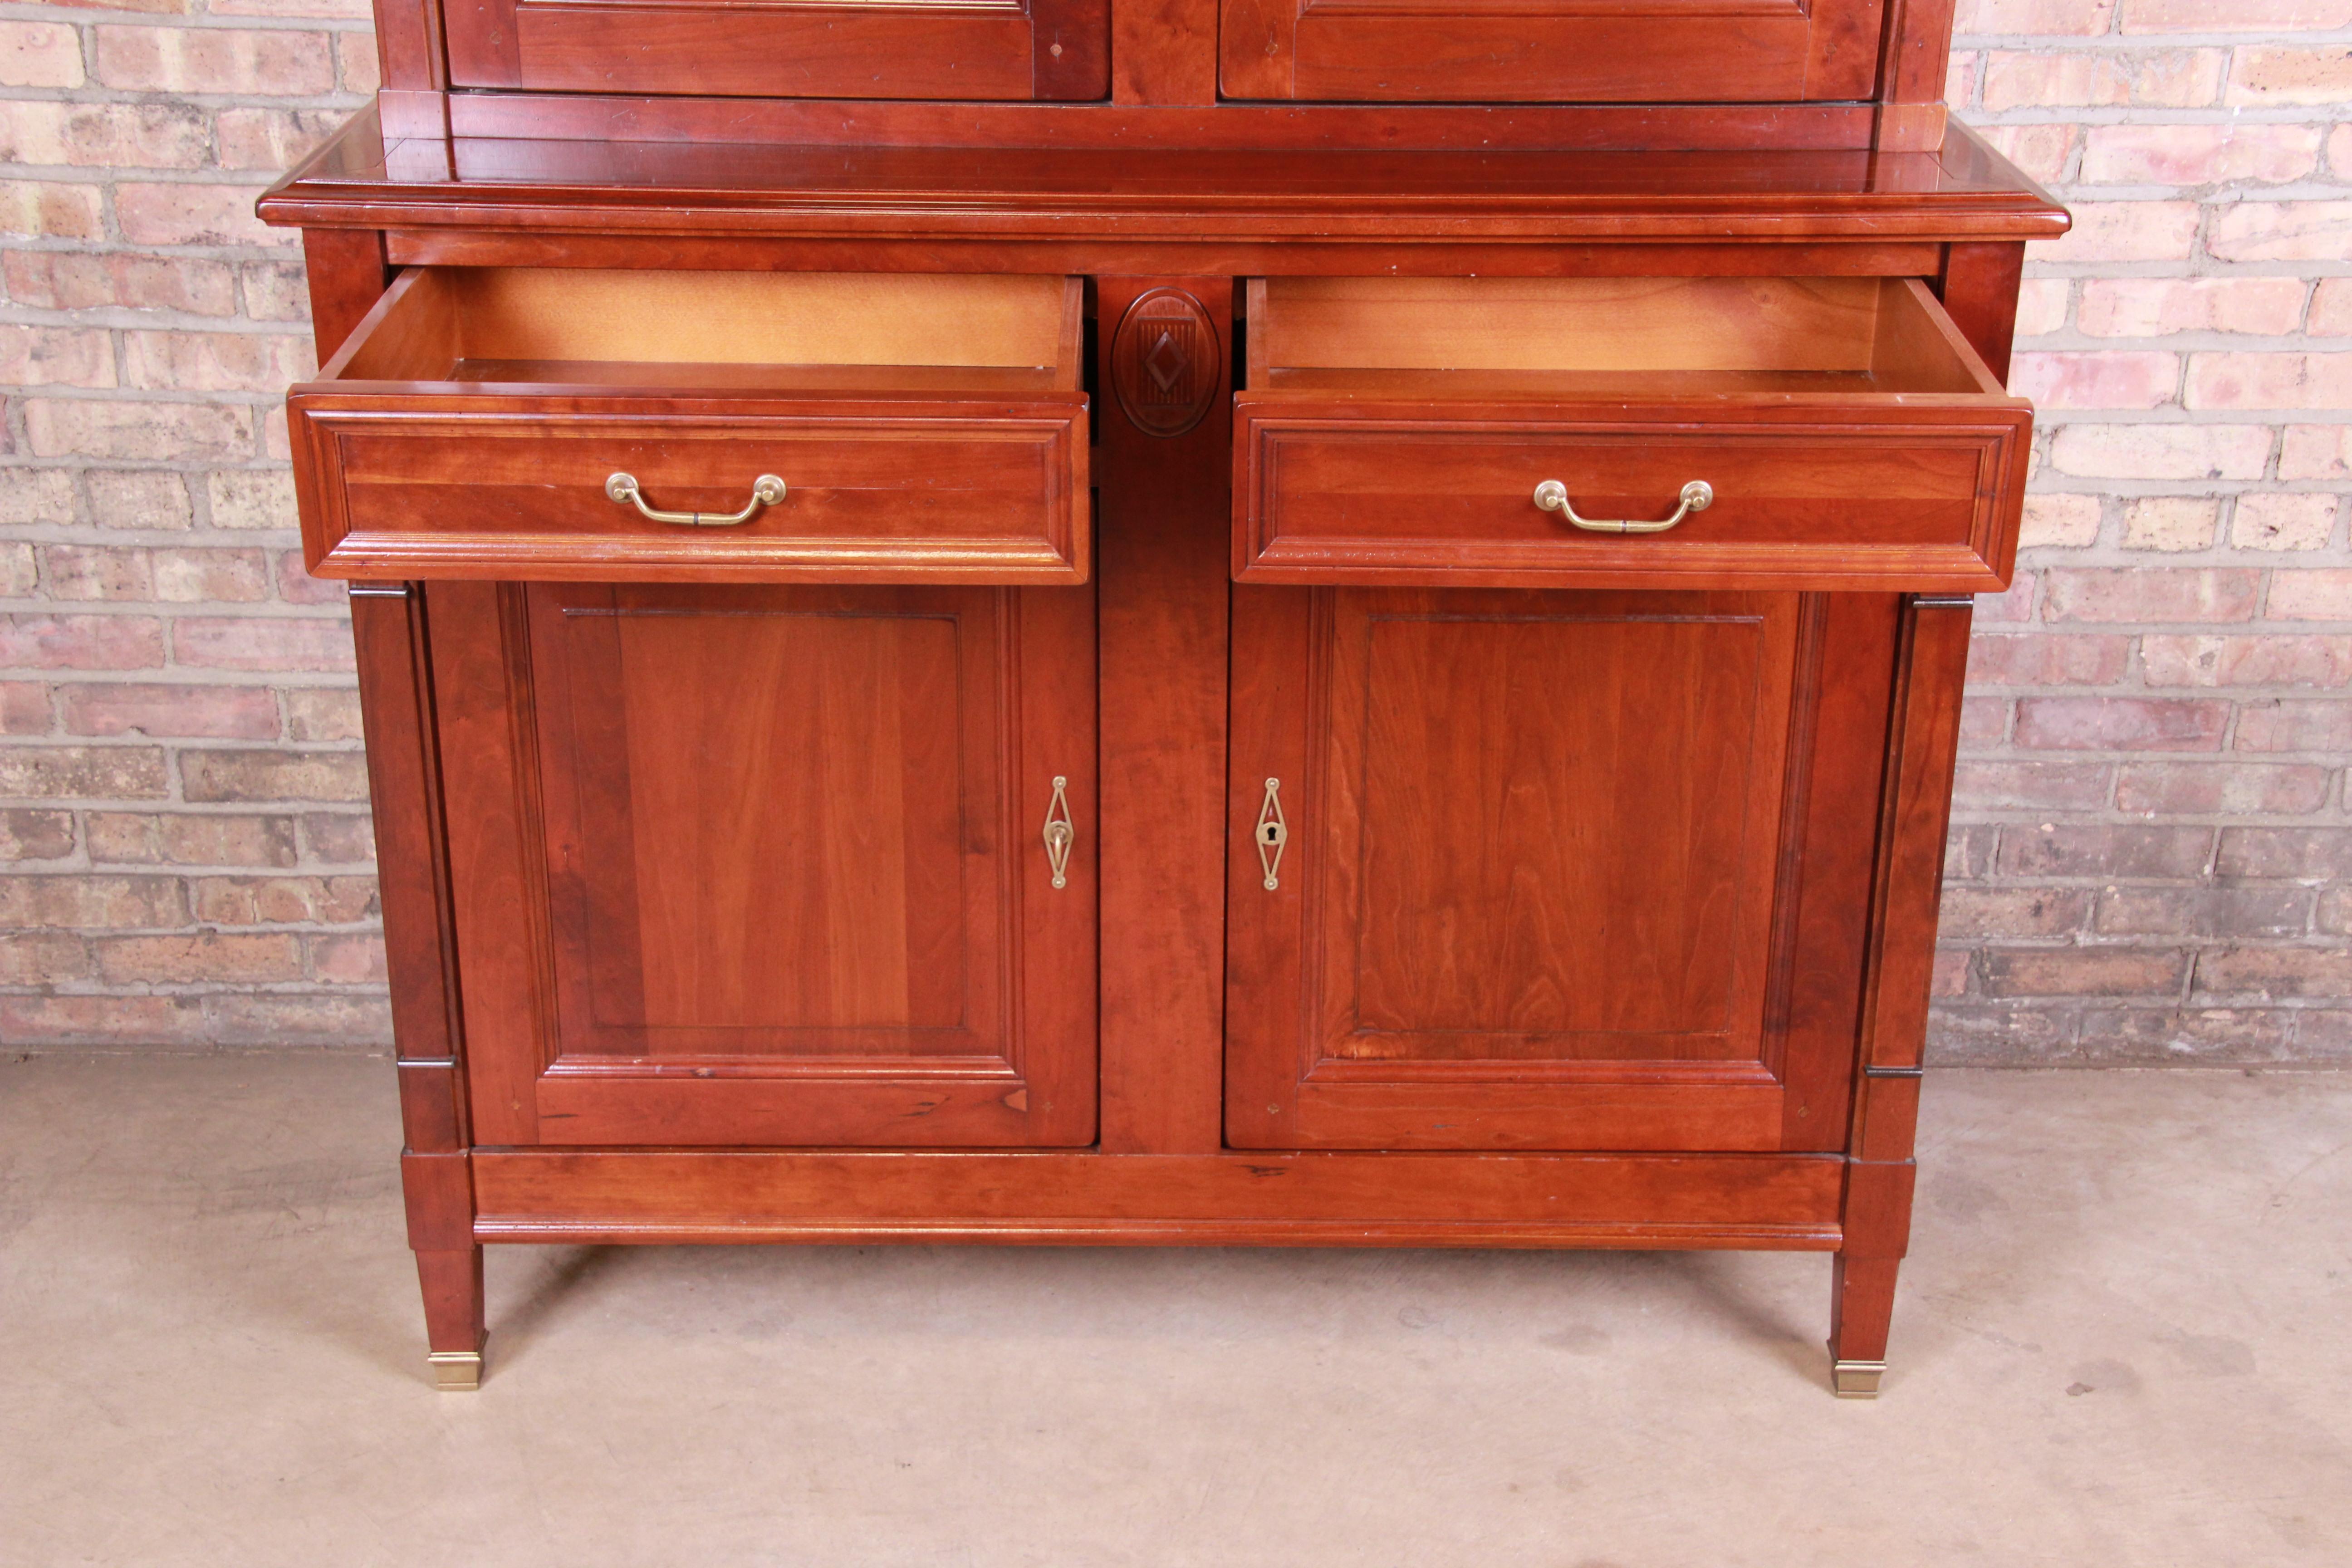 French Provincial Solid Cherry Breakfront Bookcase or Bar Cabinet by Grange 1